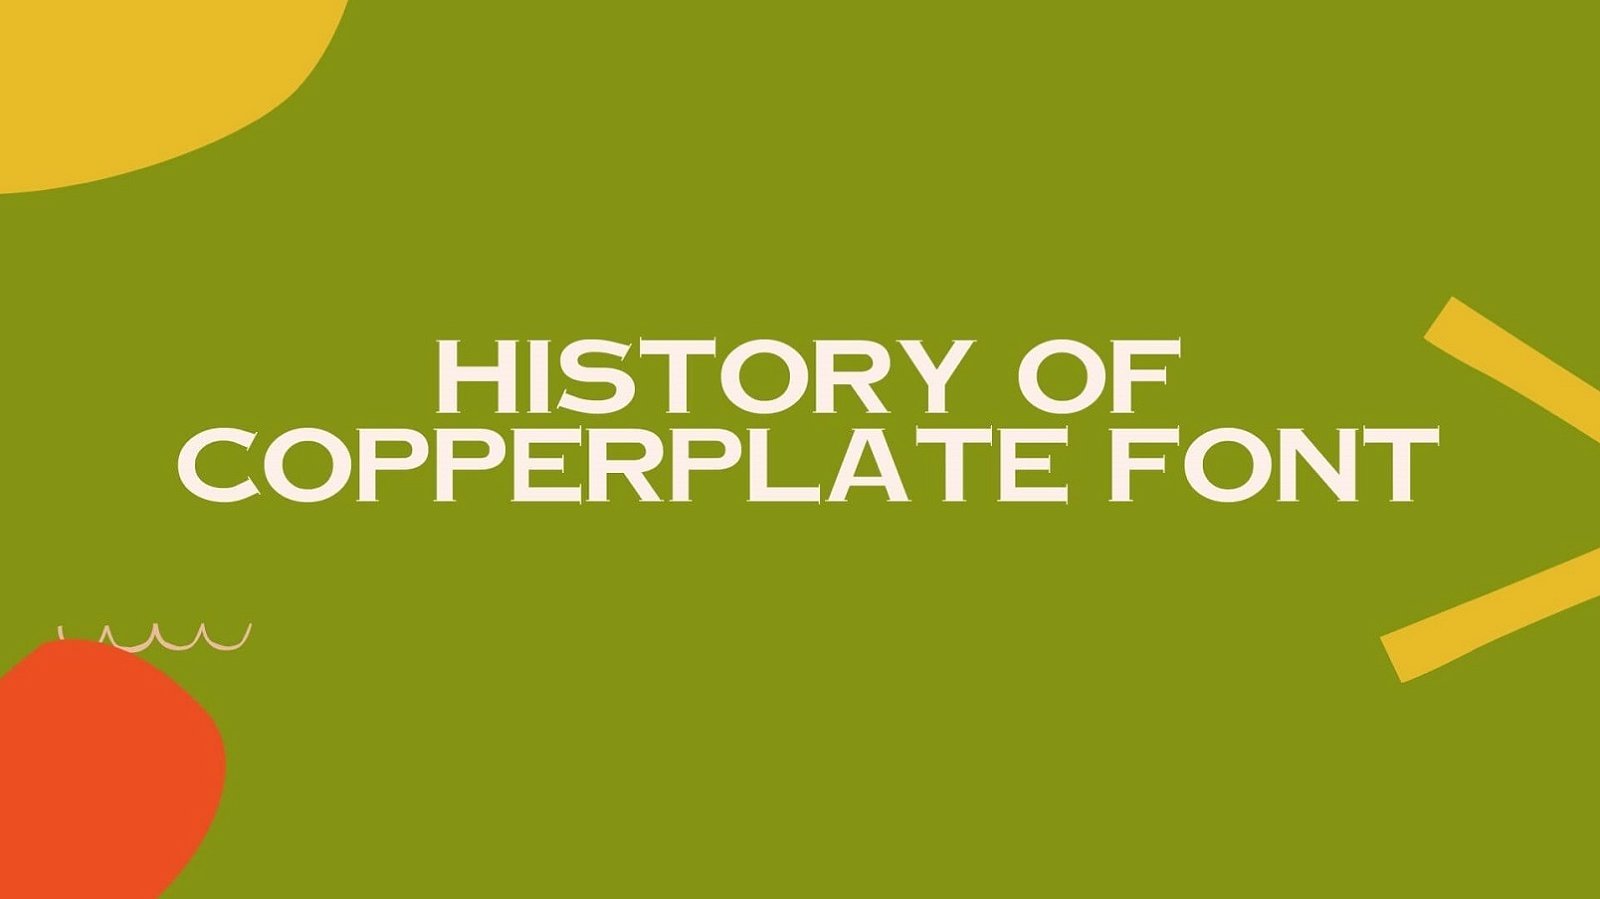 History of Copperplate Font